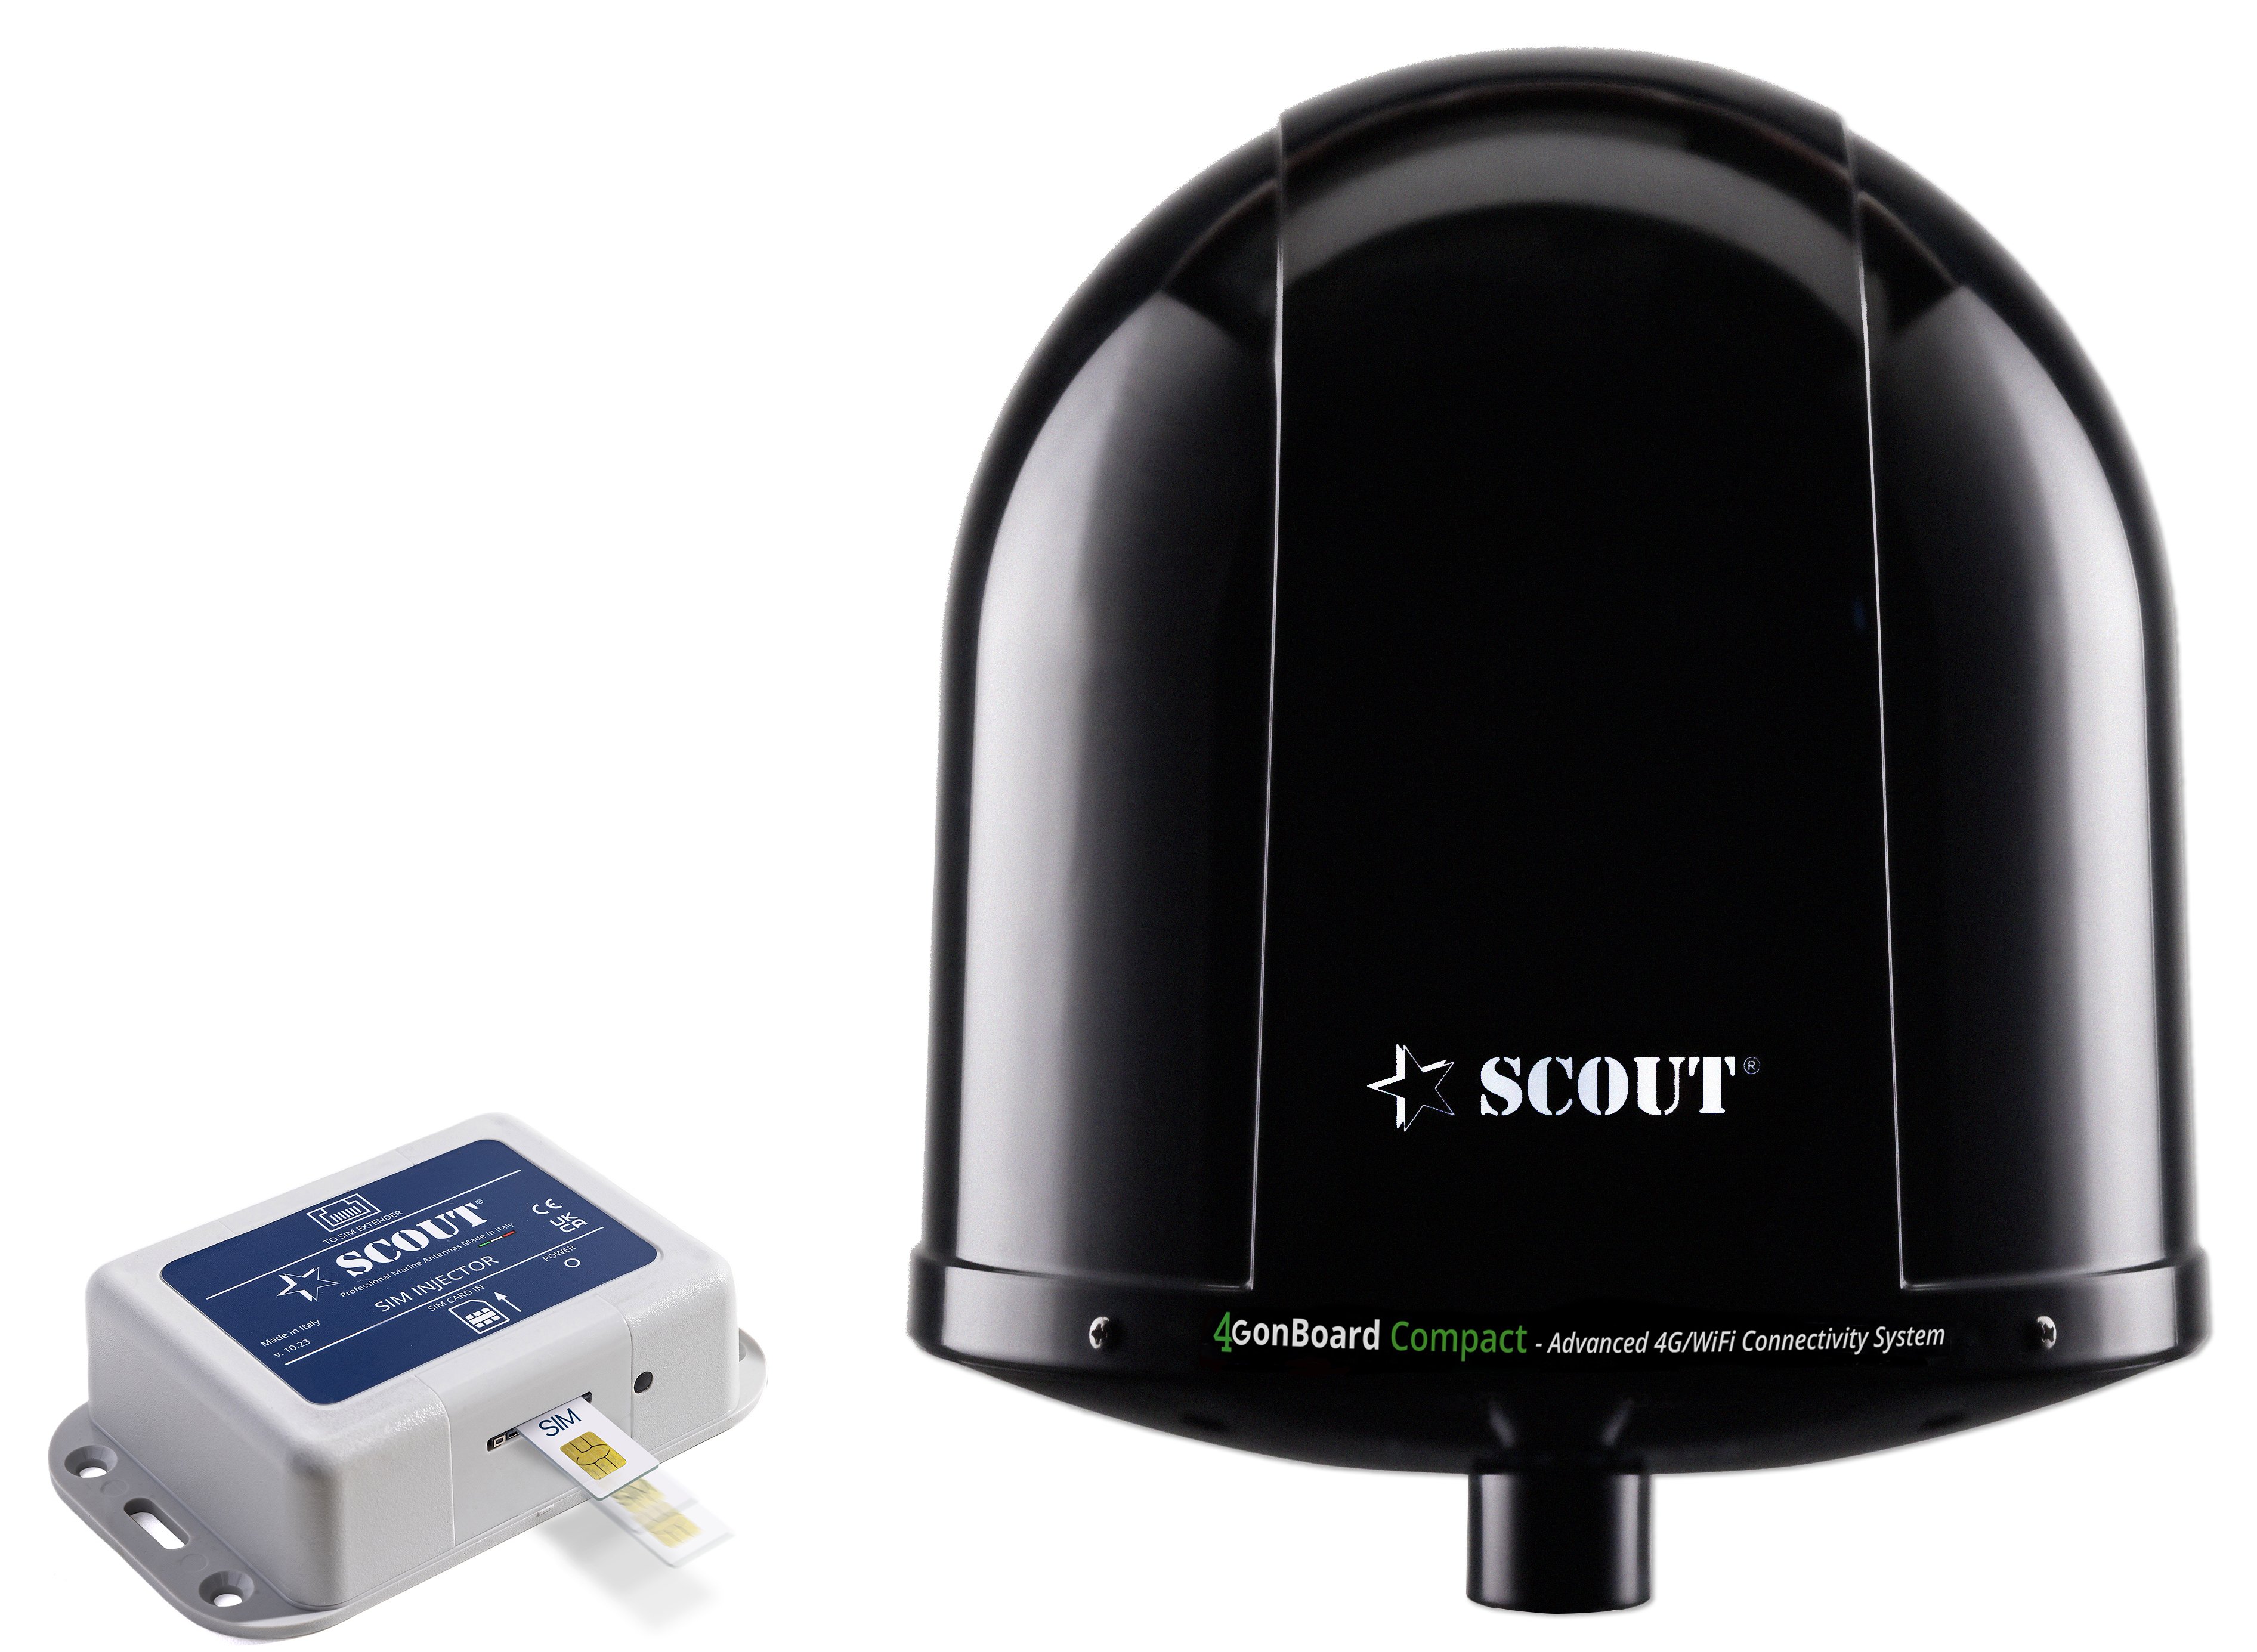 Scout 4G onBoard Compact Antenne - schwarz